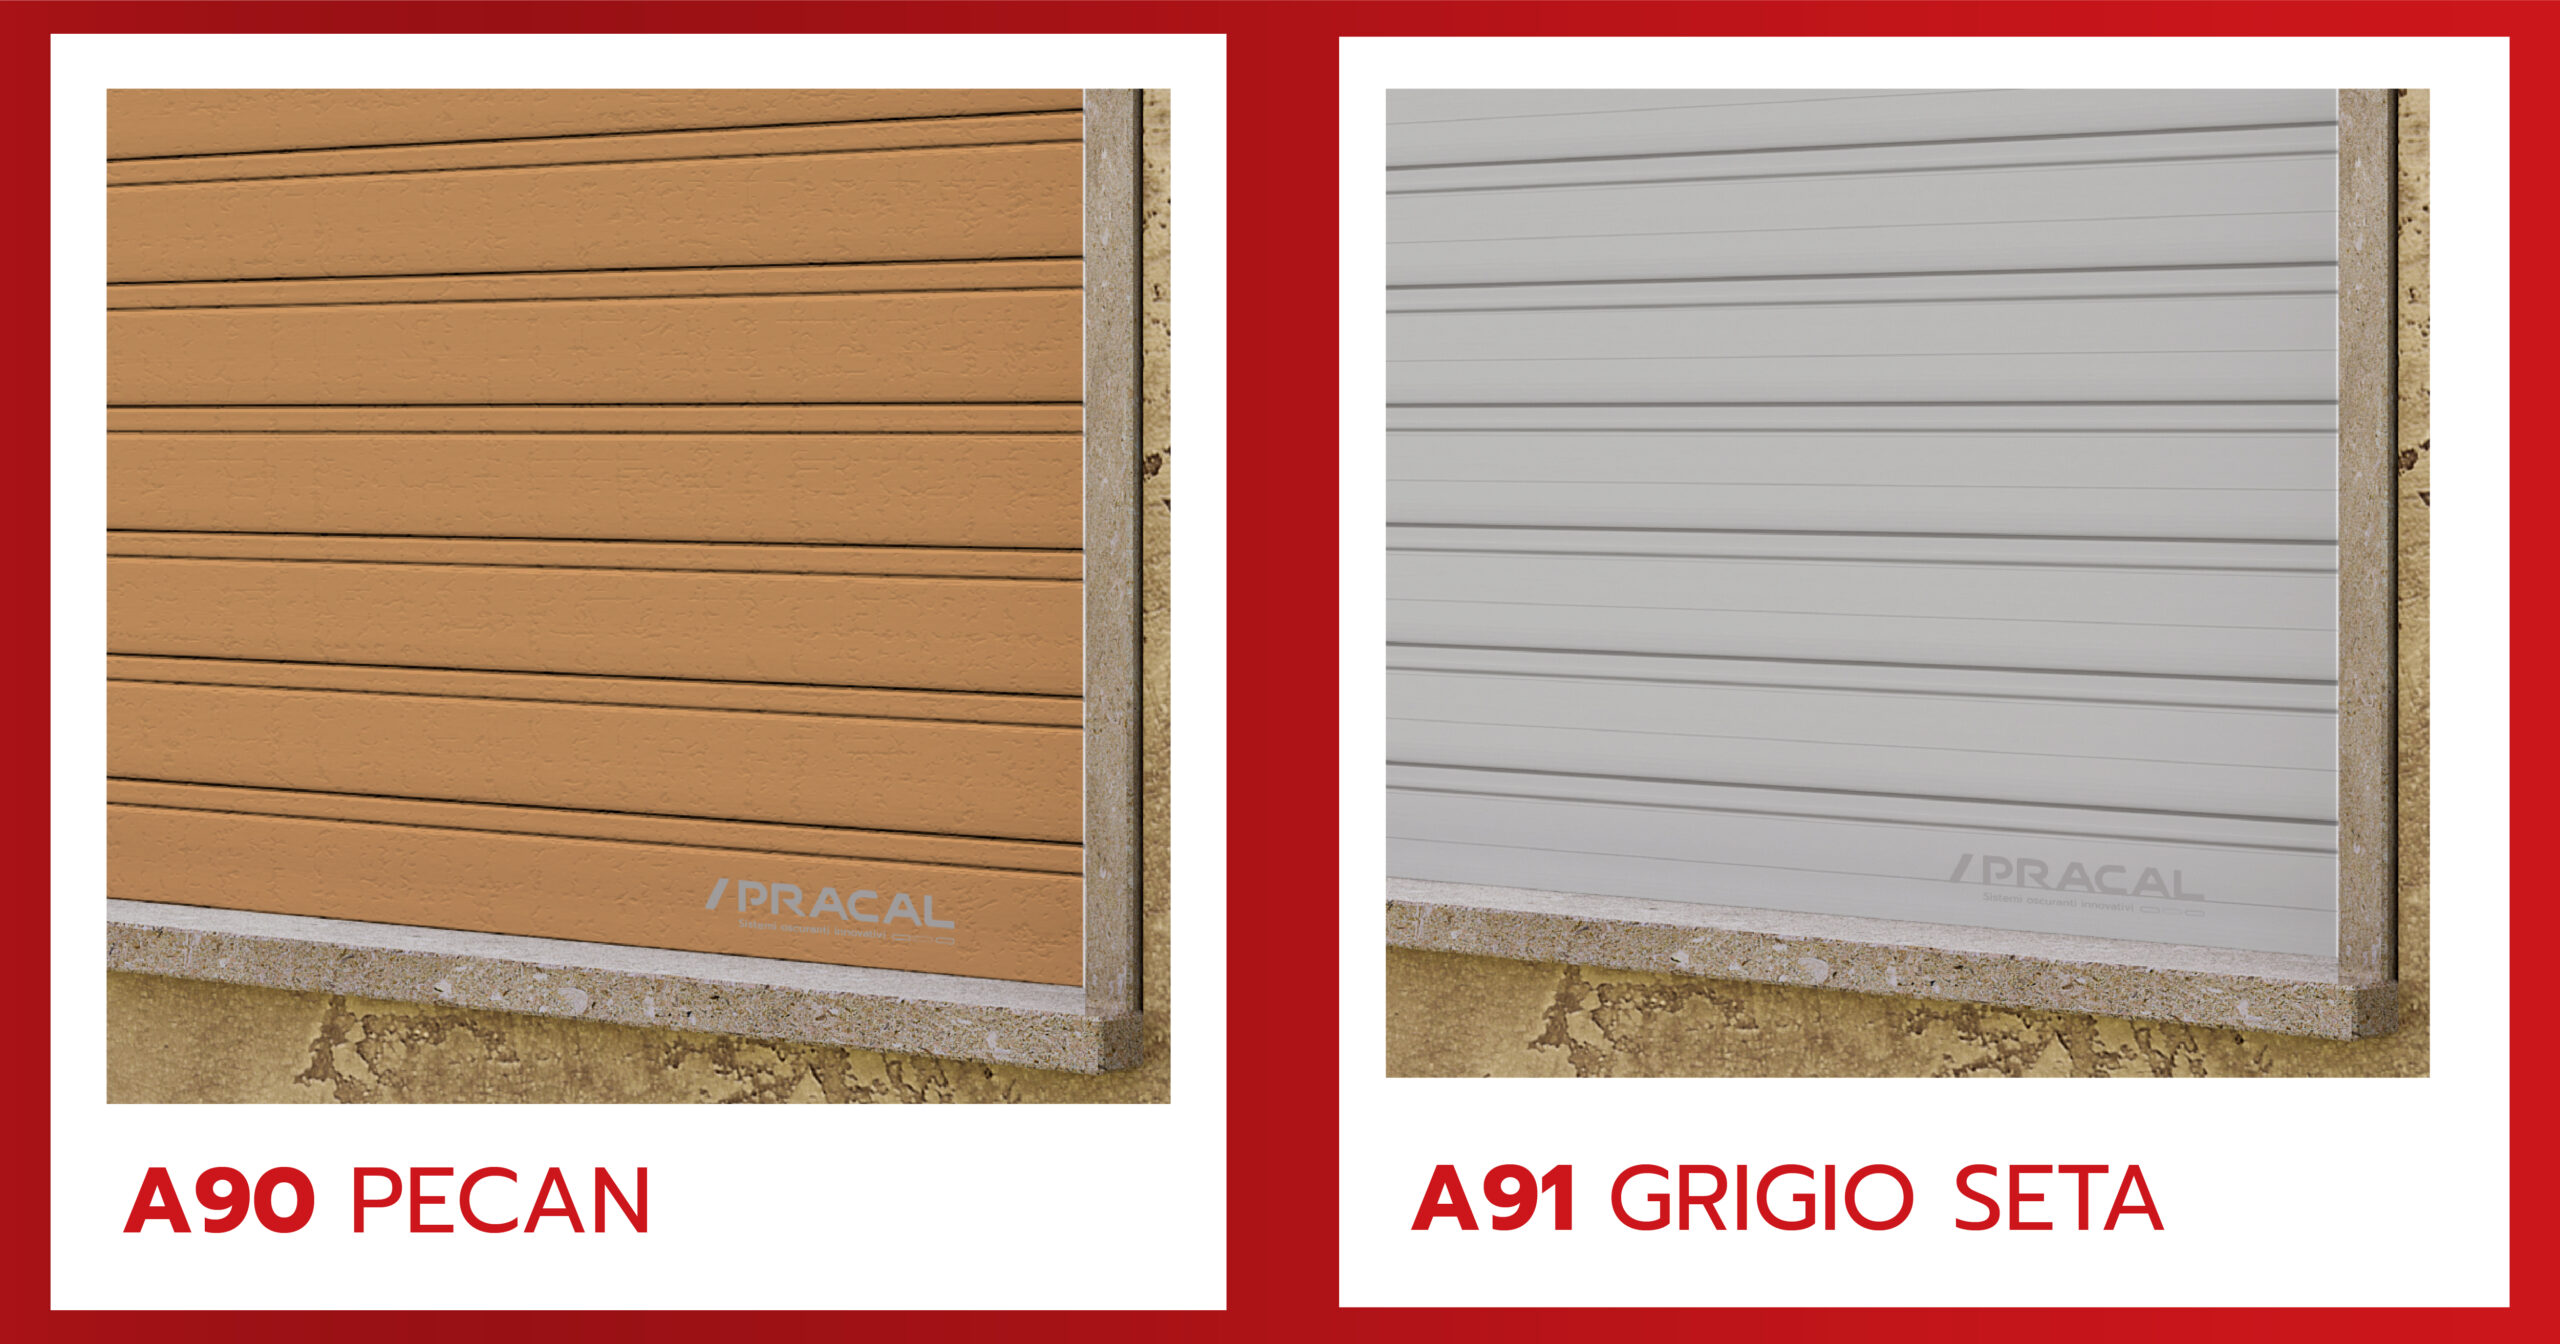 New Pracal colors for aluminum and steel shutters